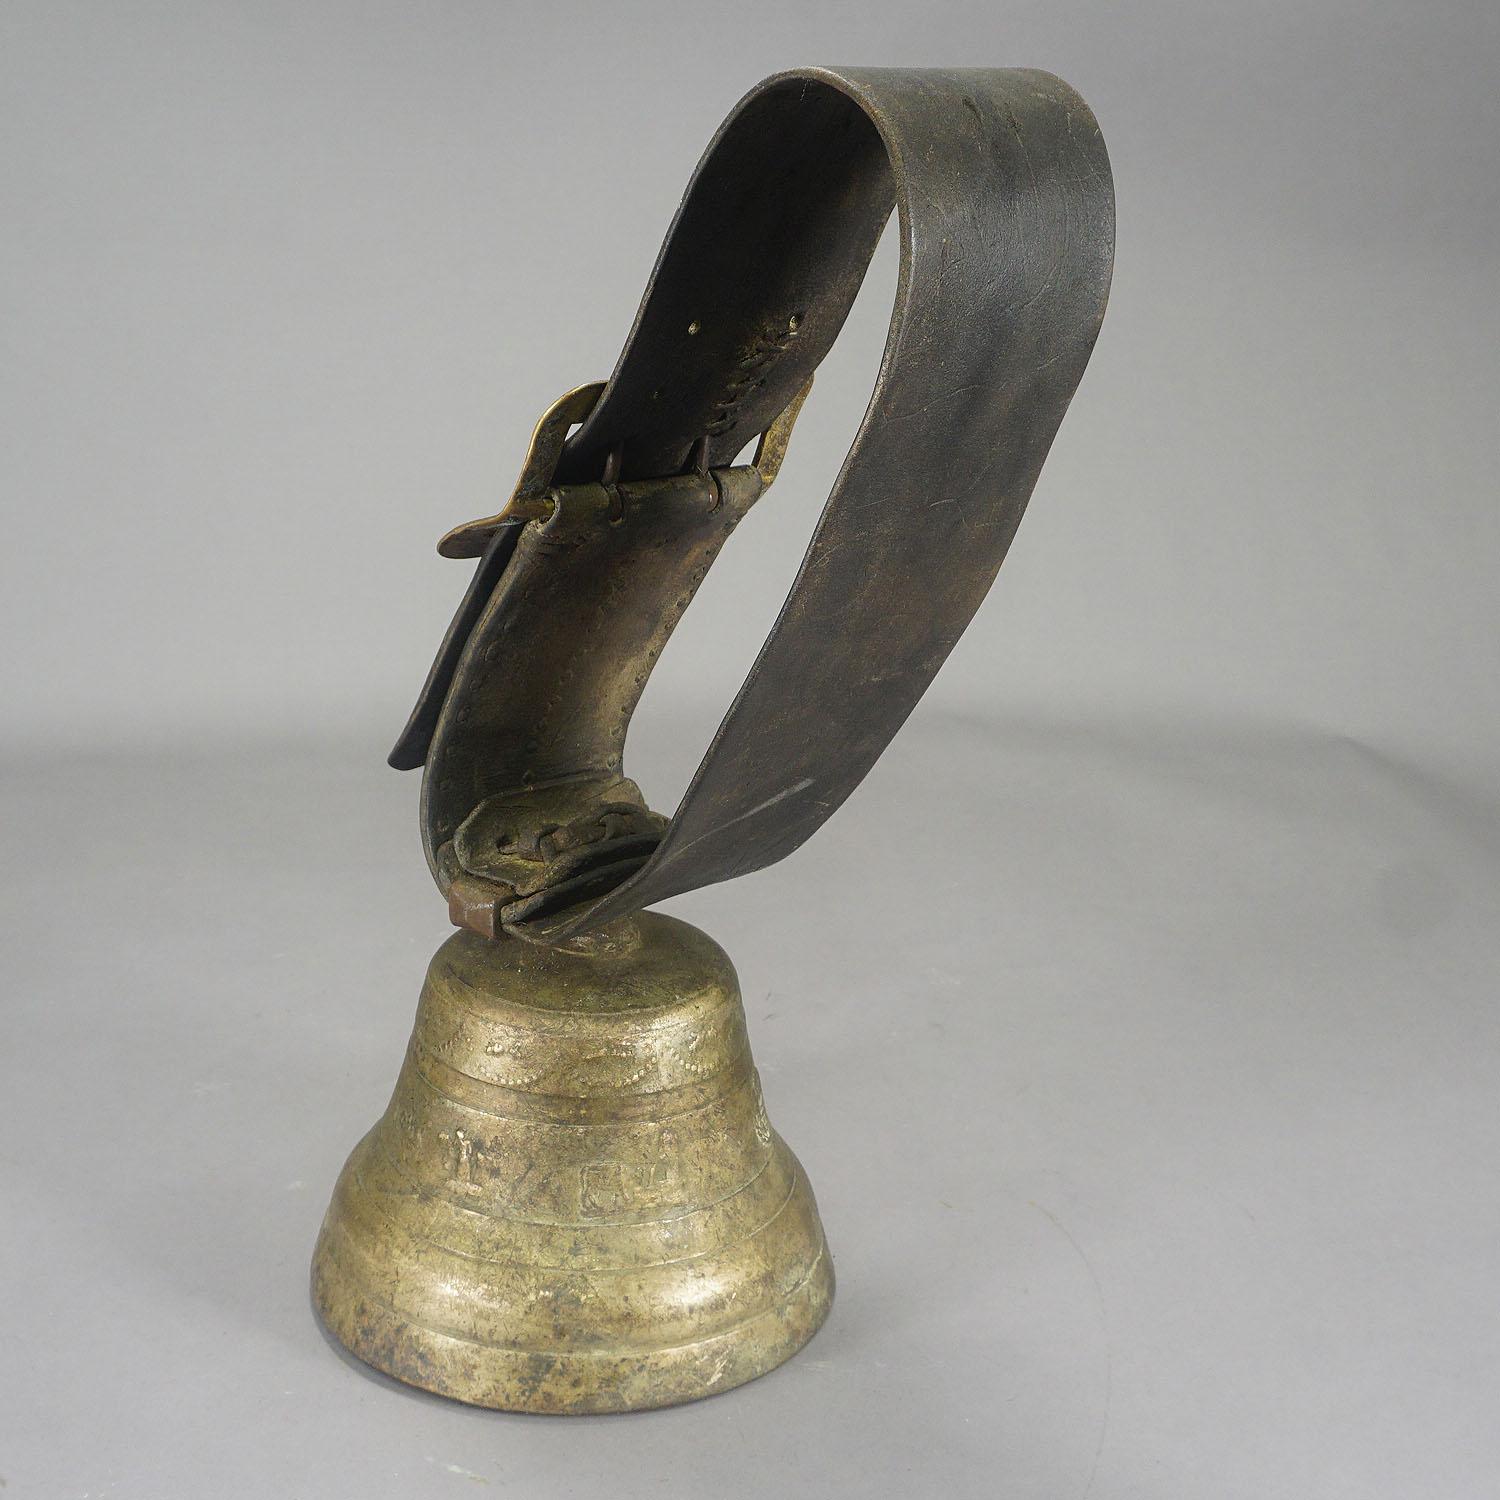 A large casted bronze cow bell from the alps region of Switzerland, manufactured around 1900. The antique bell features high relief motifs of heraldig symbols of Swizerland, cows and farmers. The bell comes with its original brown leather strap with